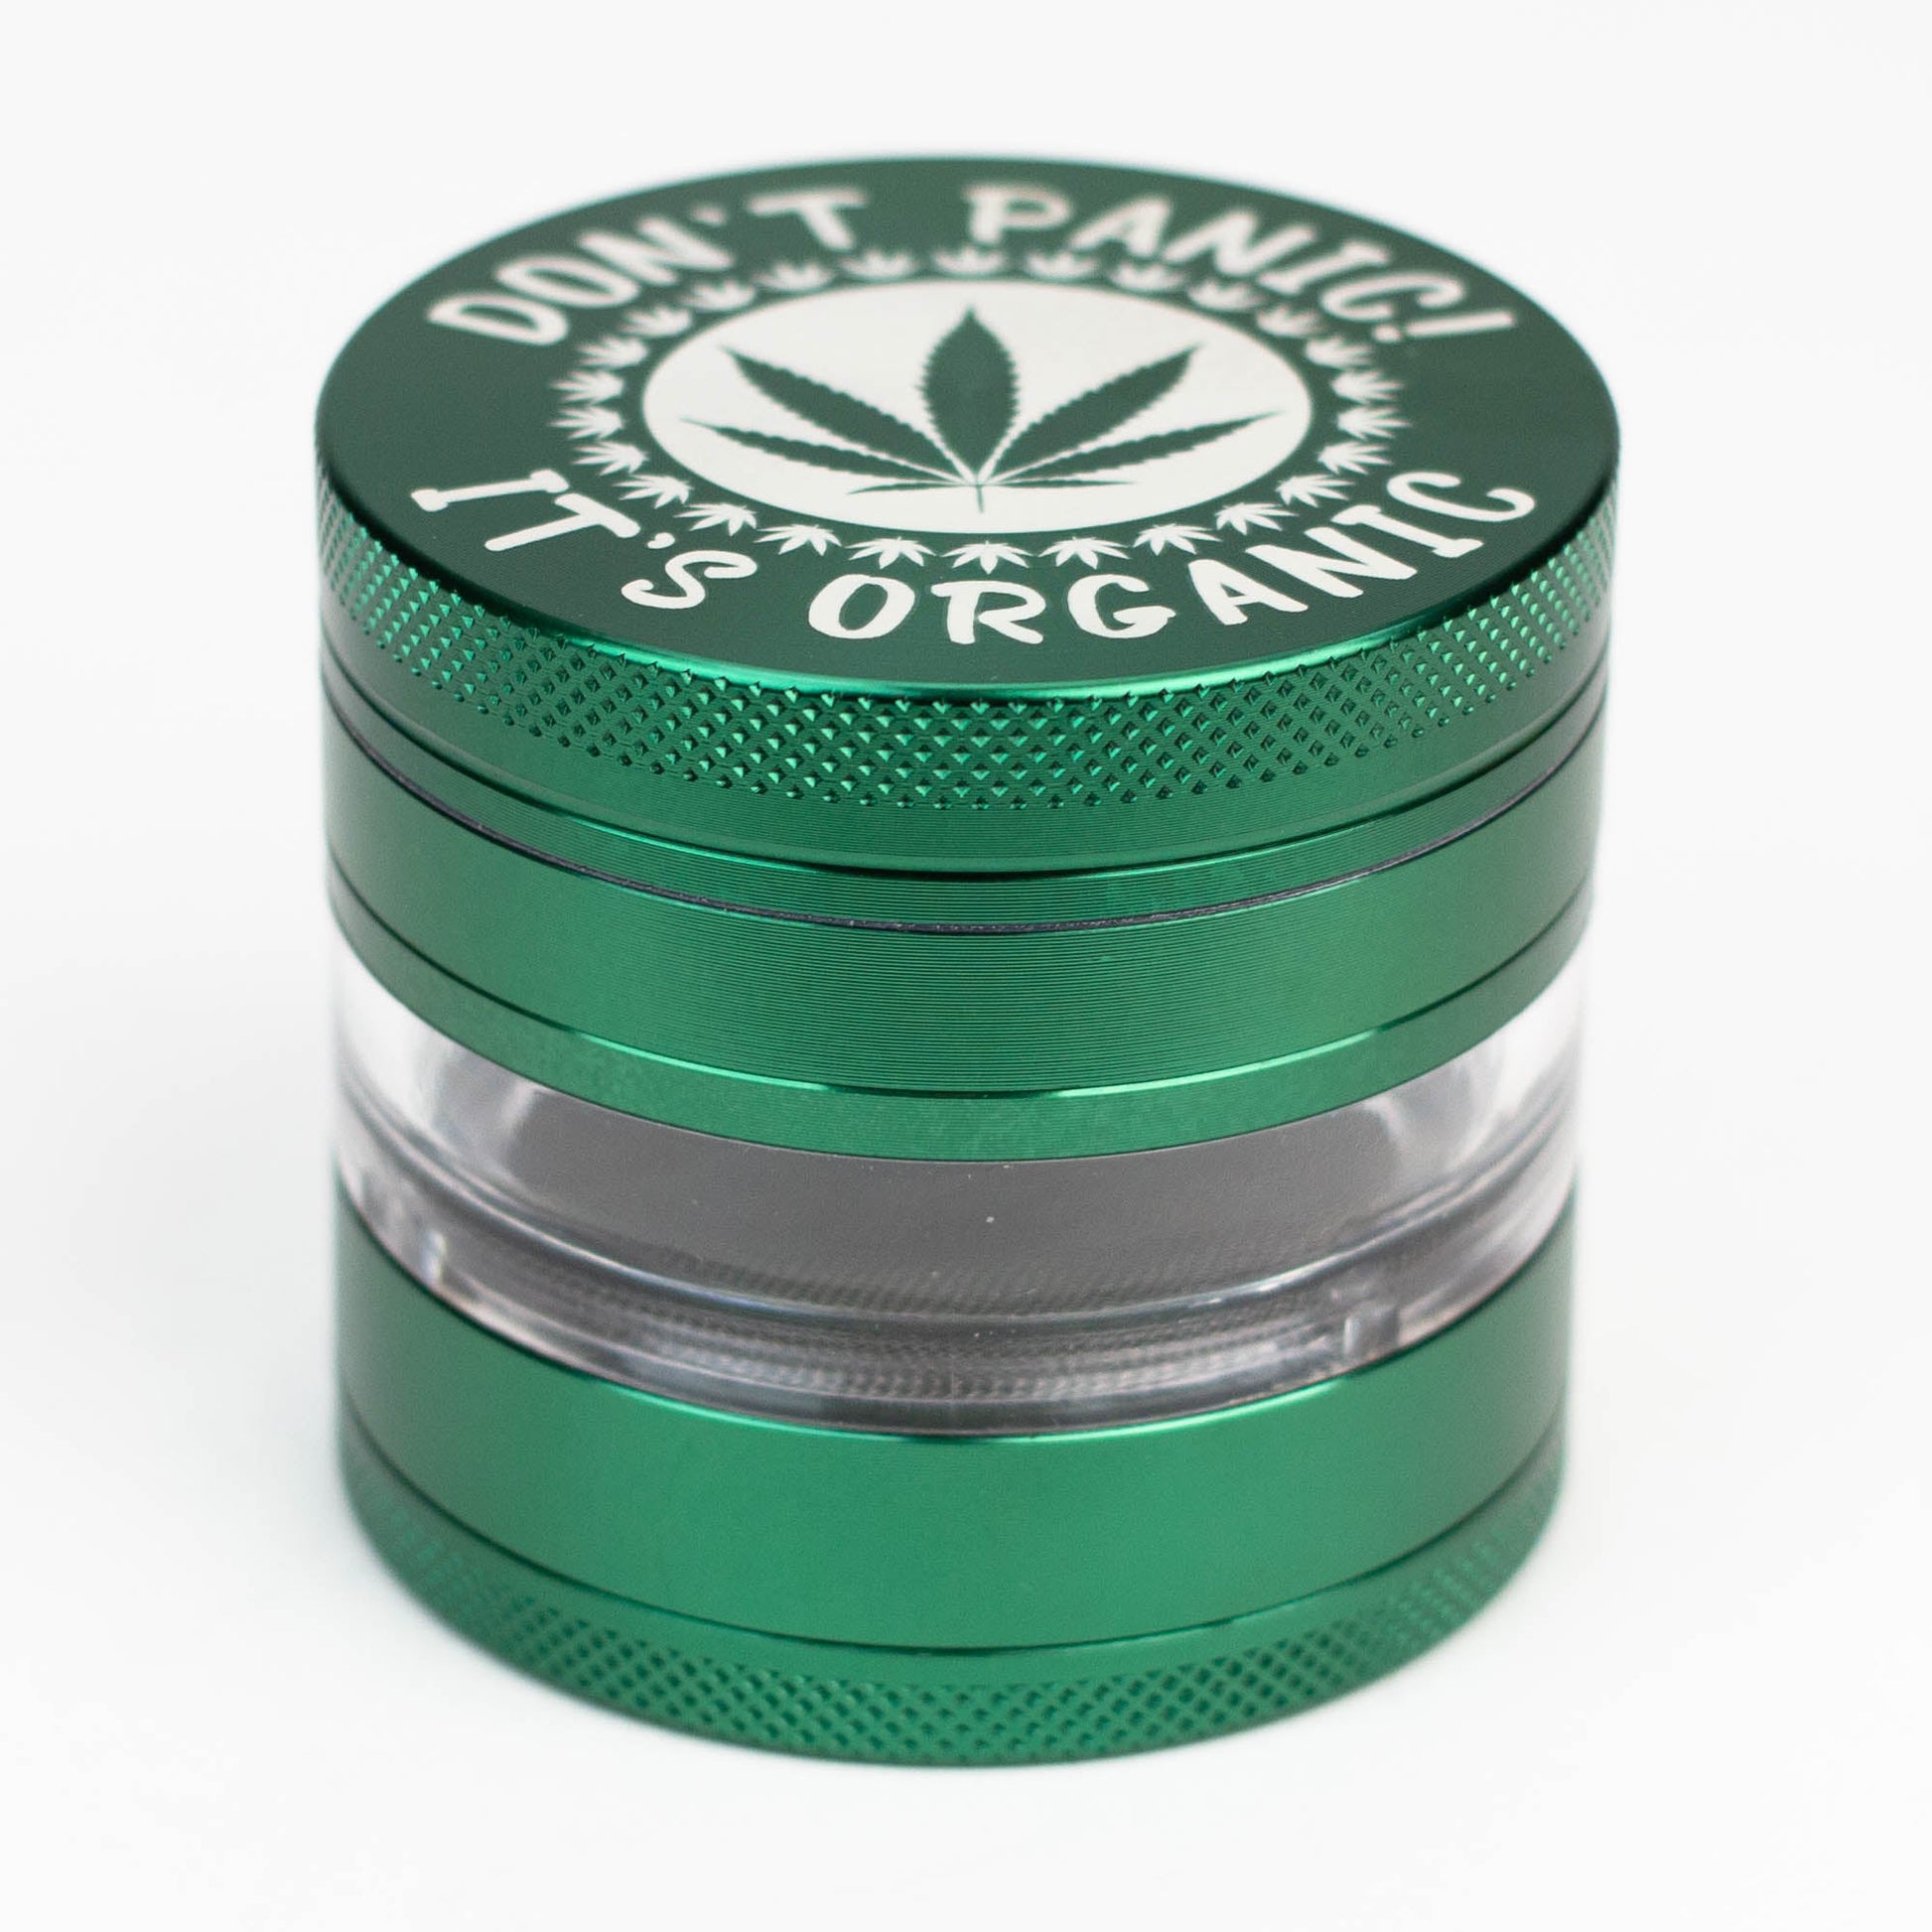 Heavy Duty Large "Don't Panic It's Organic" 4 Parts Weed Grinder Engraved in Canada_13